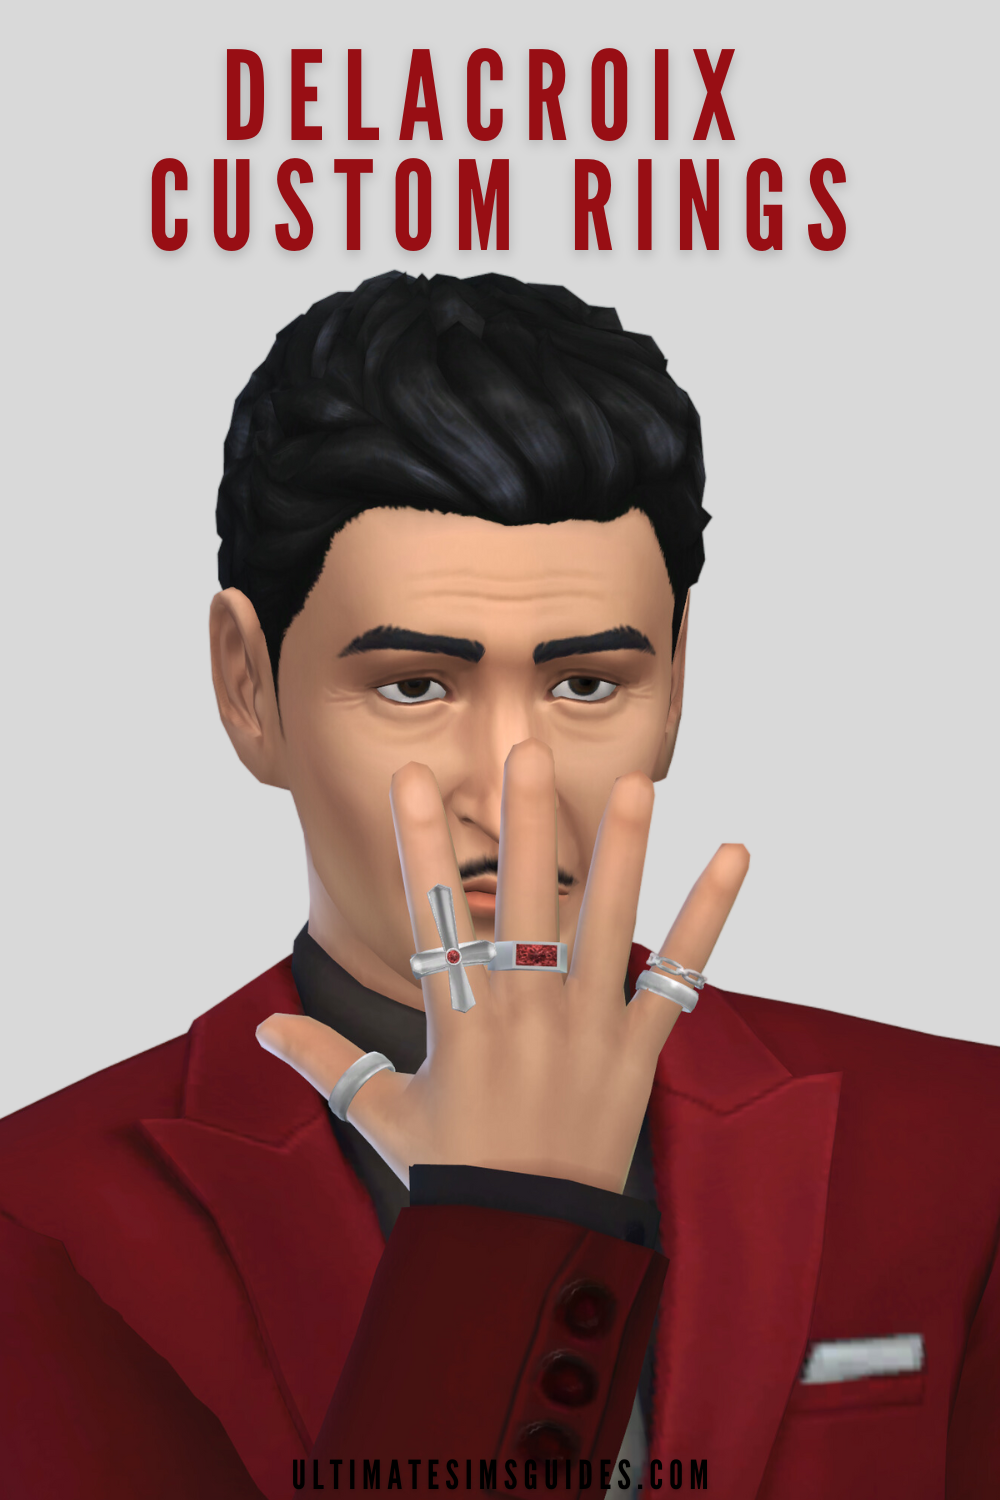 Mortimer Goth, a character from The Sims 4, posing in a red suit with his hand in front of his face showing off some goth cc rings with a cross in silver.